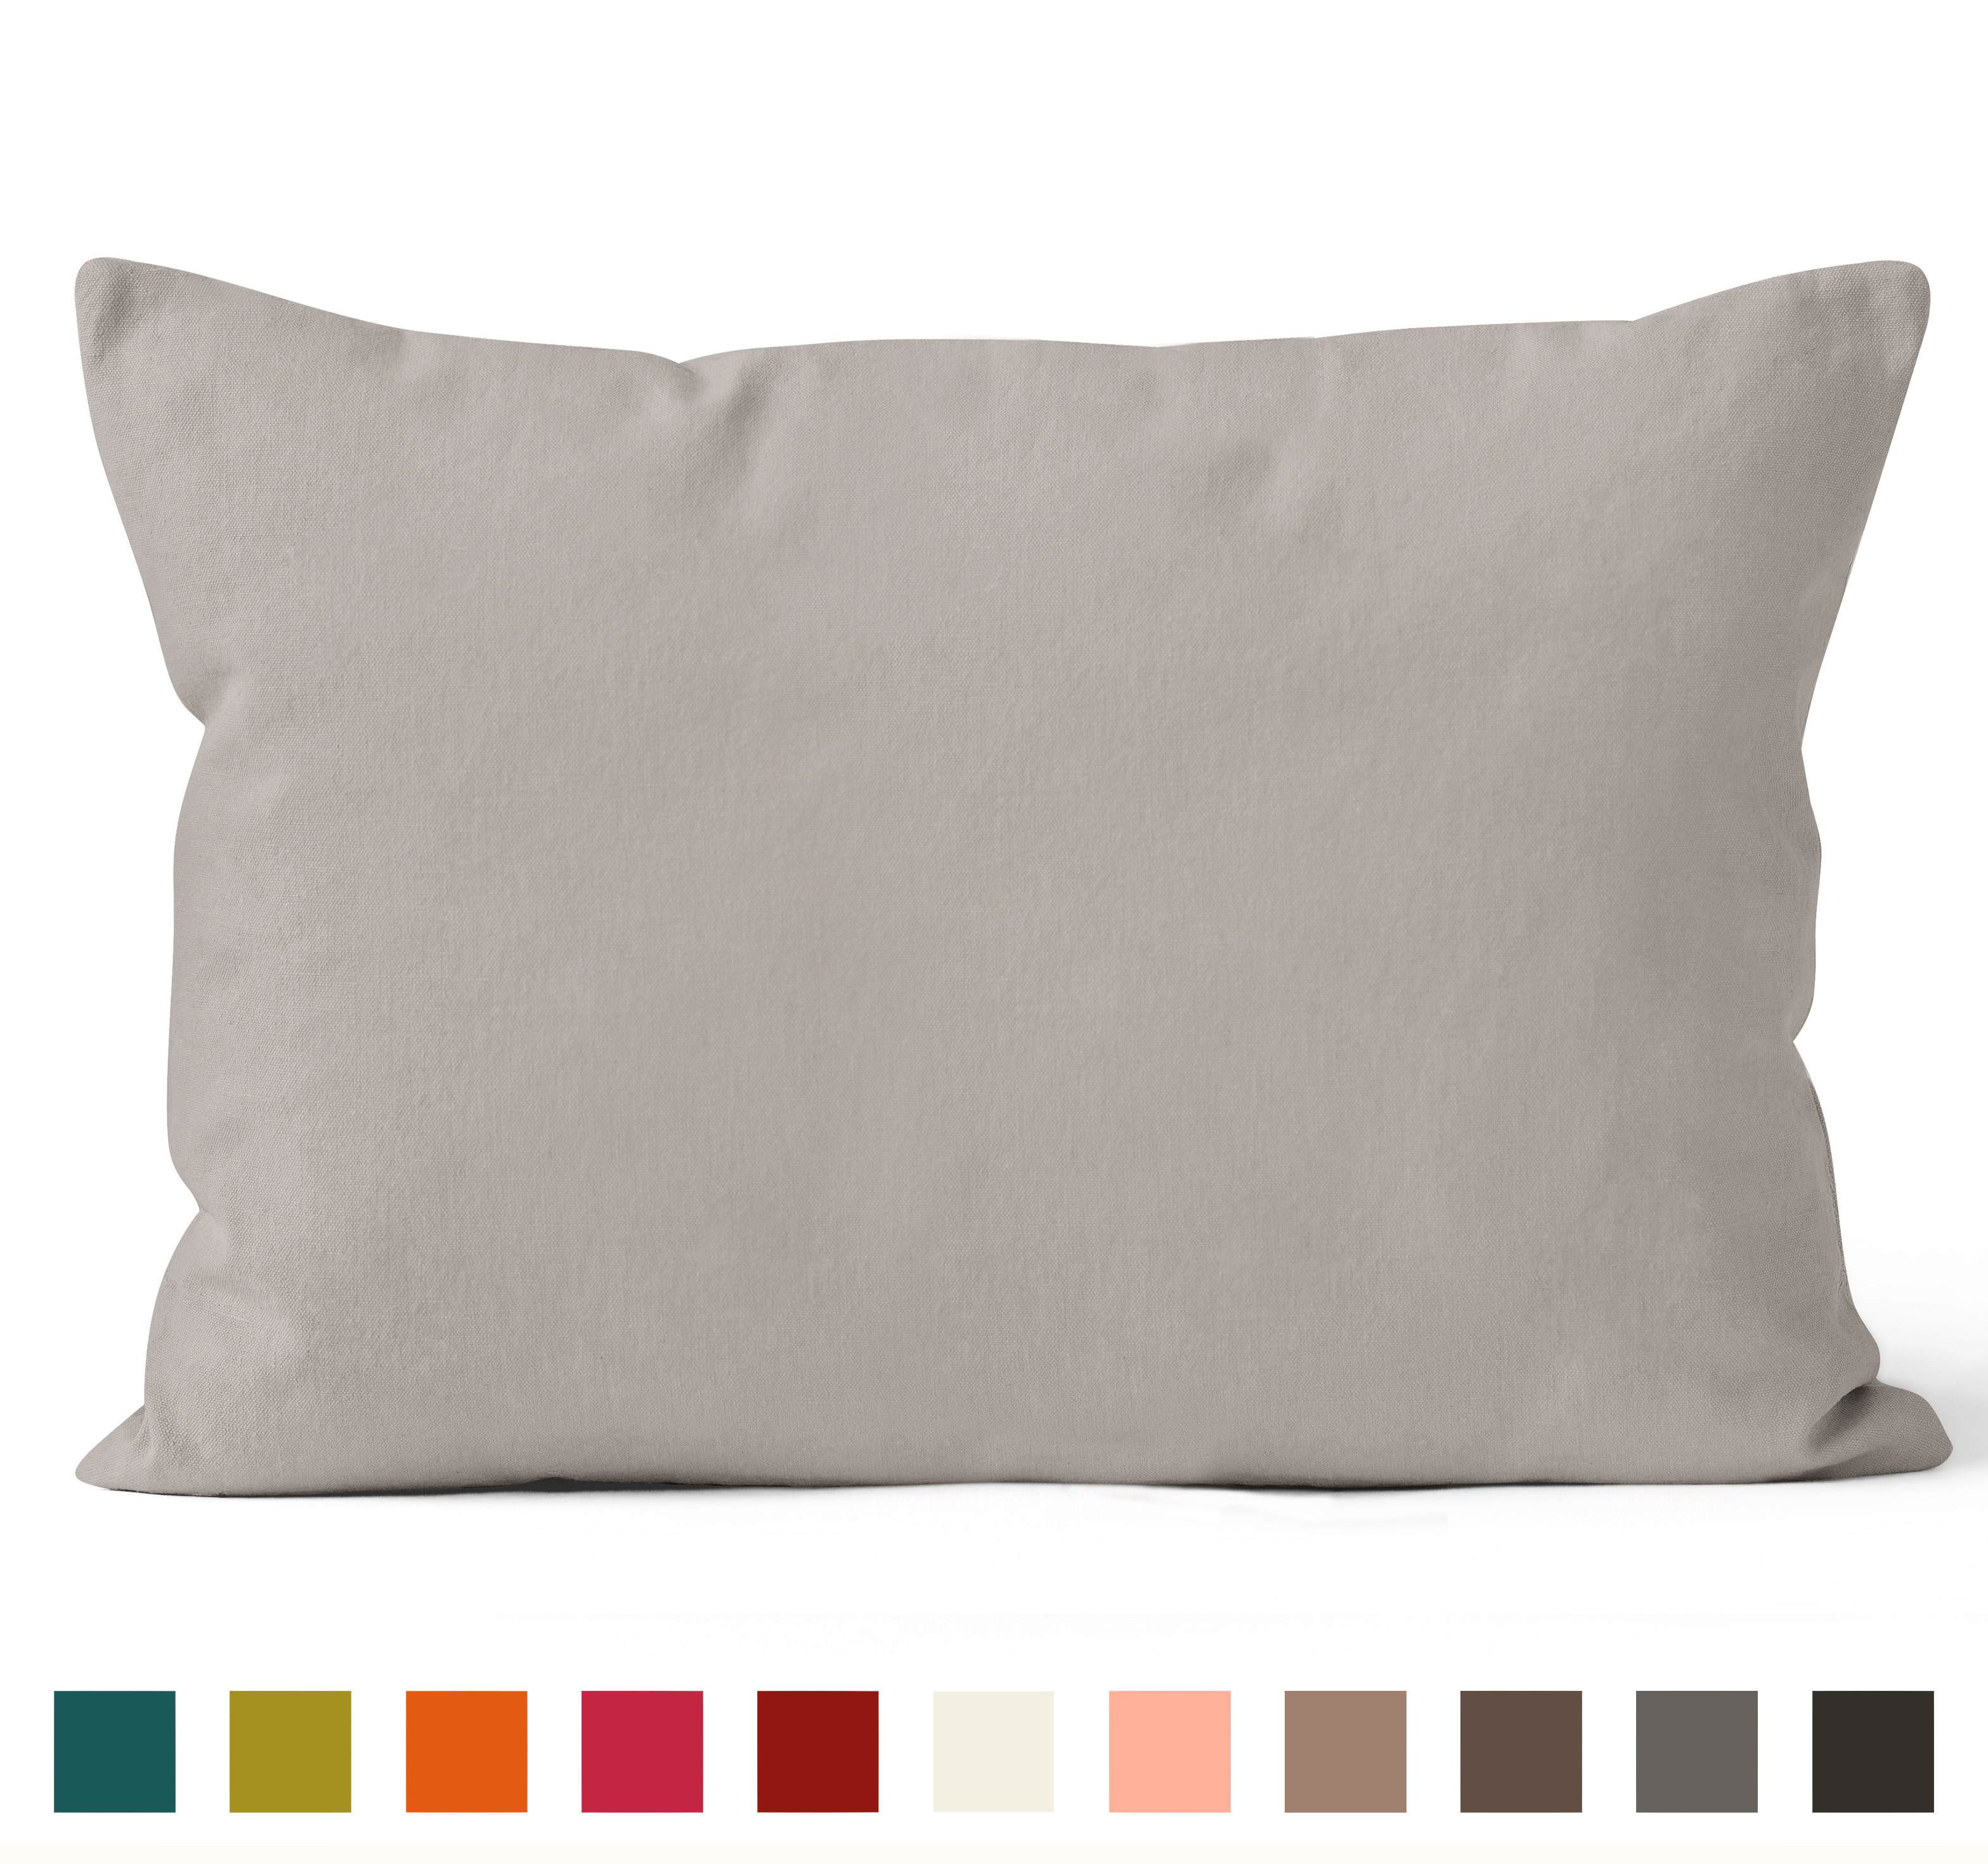 Encasa Homes Dyed Cotton Canvas Cushion Cover (Choose with or without fillers) - 30x50 cm, Beige